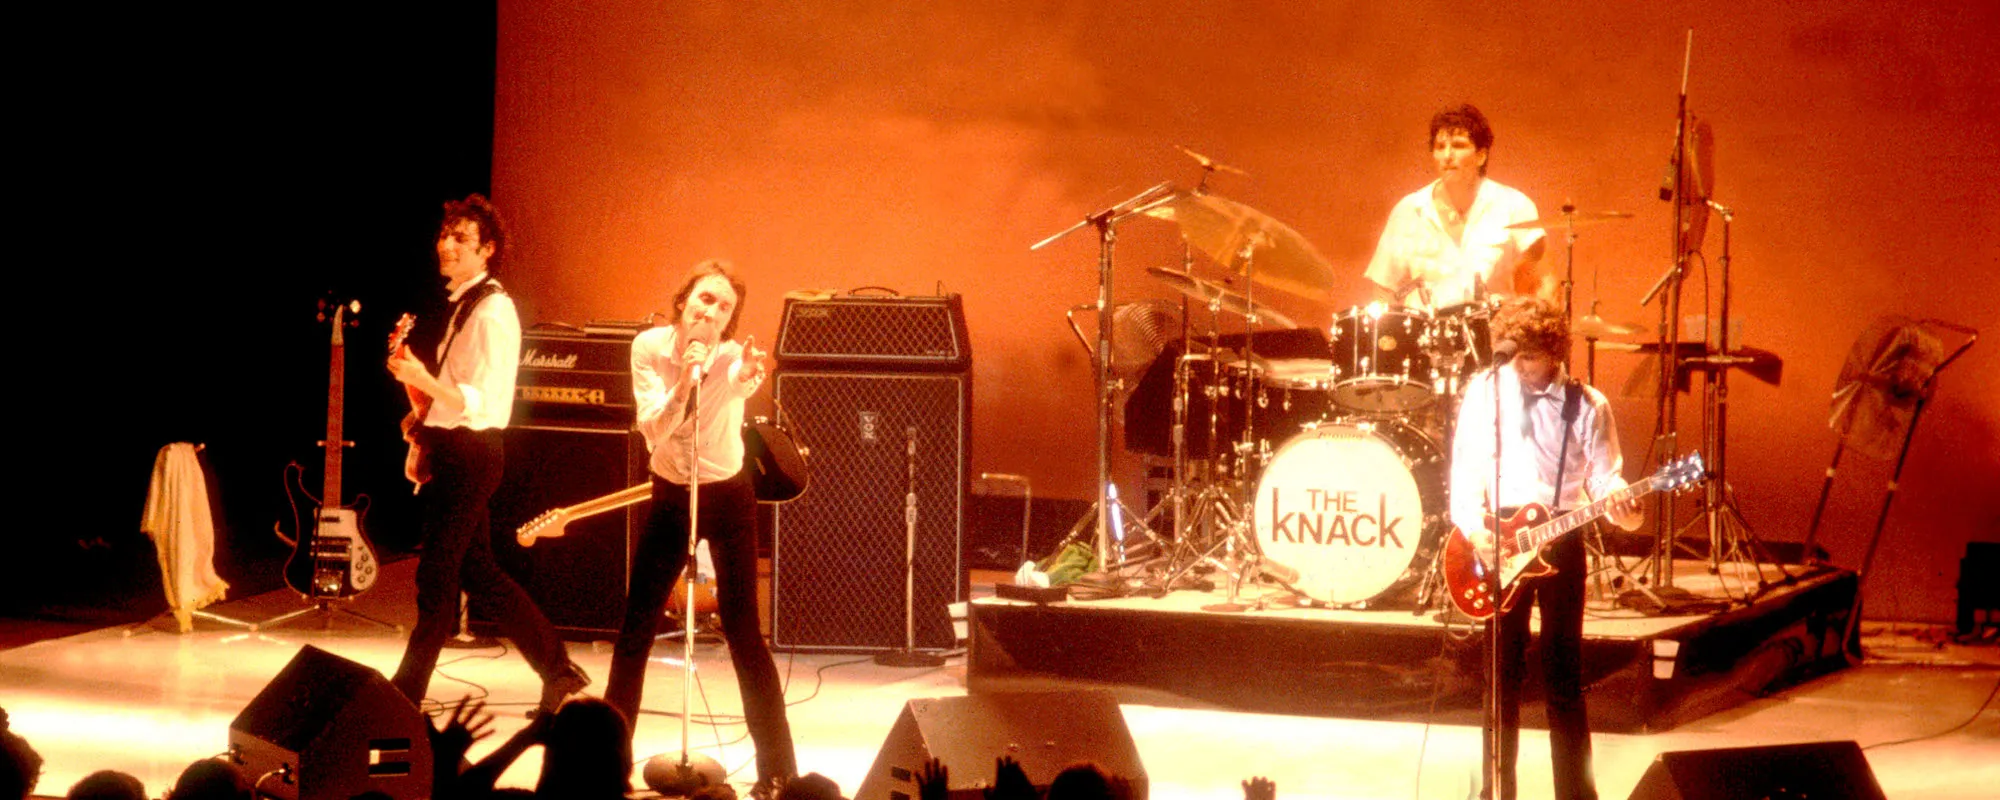 Where Are They Now?: “My Sharona” Stars, The Knack